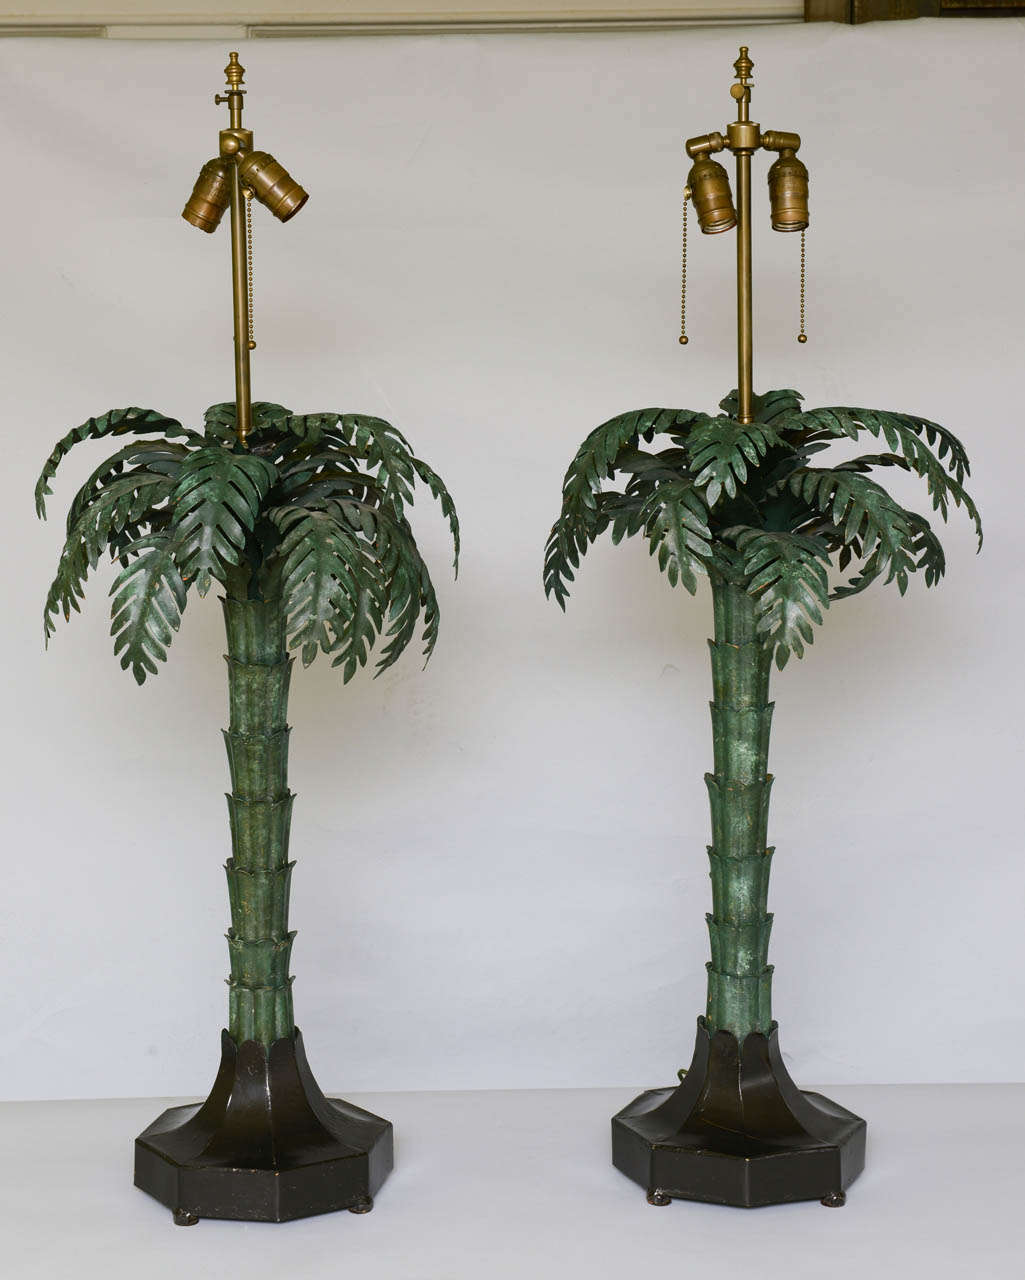 Pair of palm tree lamps, of iron, each having a mottled green finish, on black octagonal footed base. By Warren Kessler.